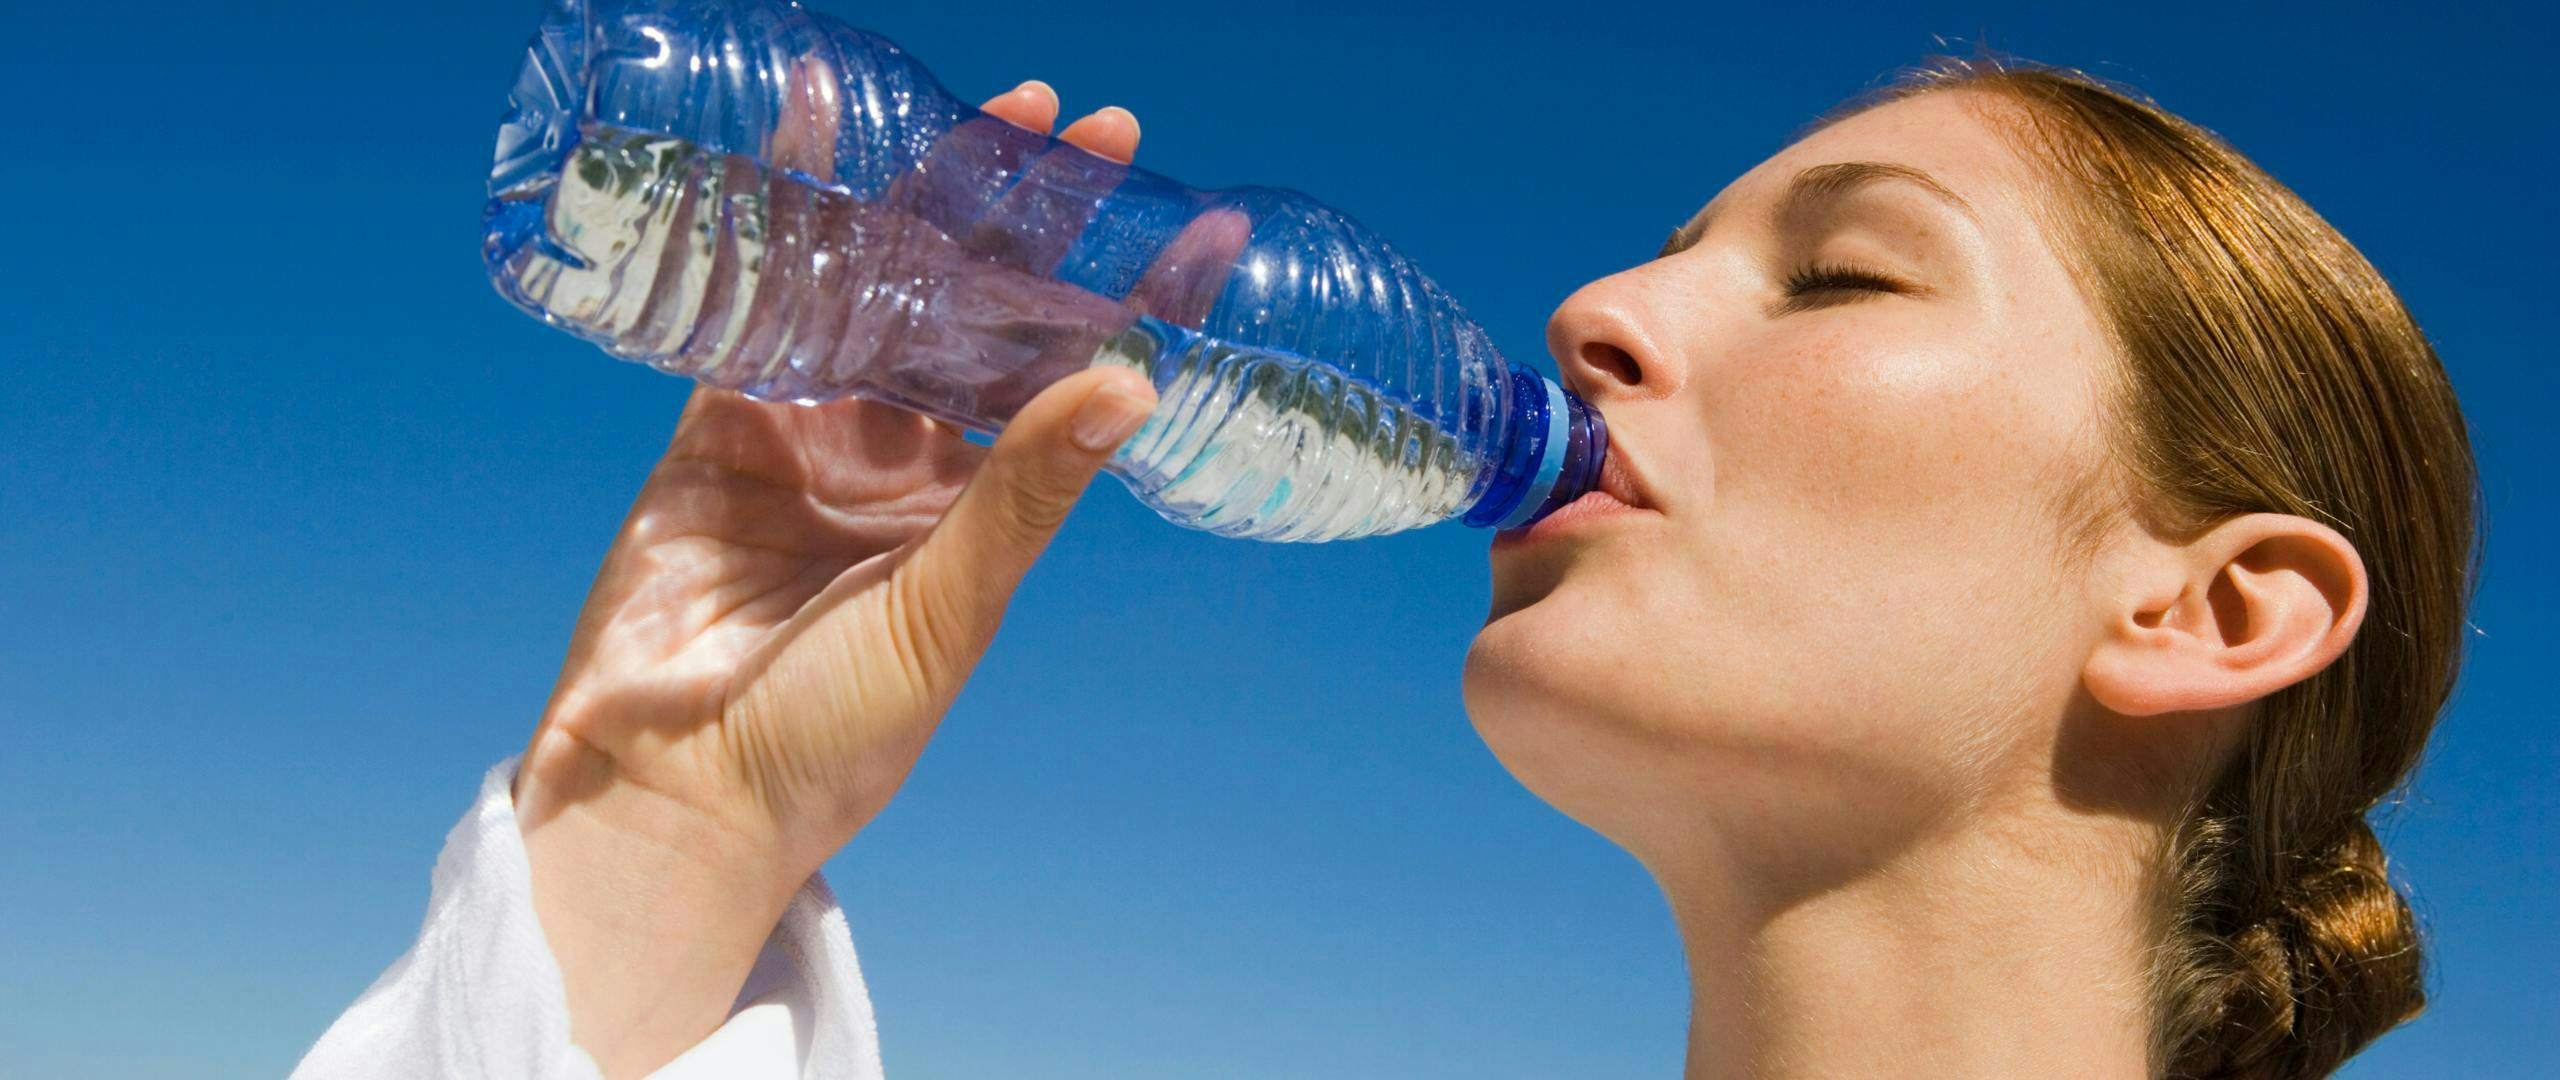 Cost Saving: Is It Cheaper to Buy Bottled Water or a Filter